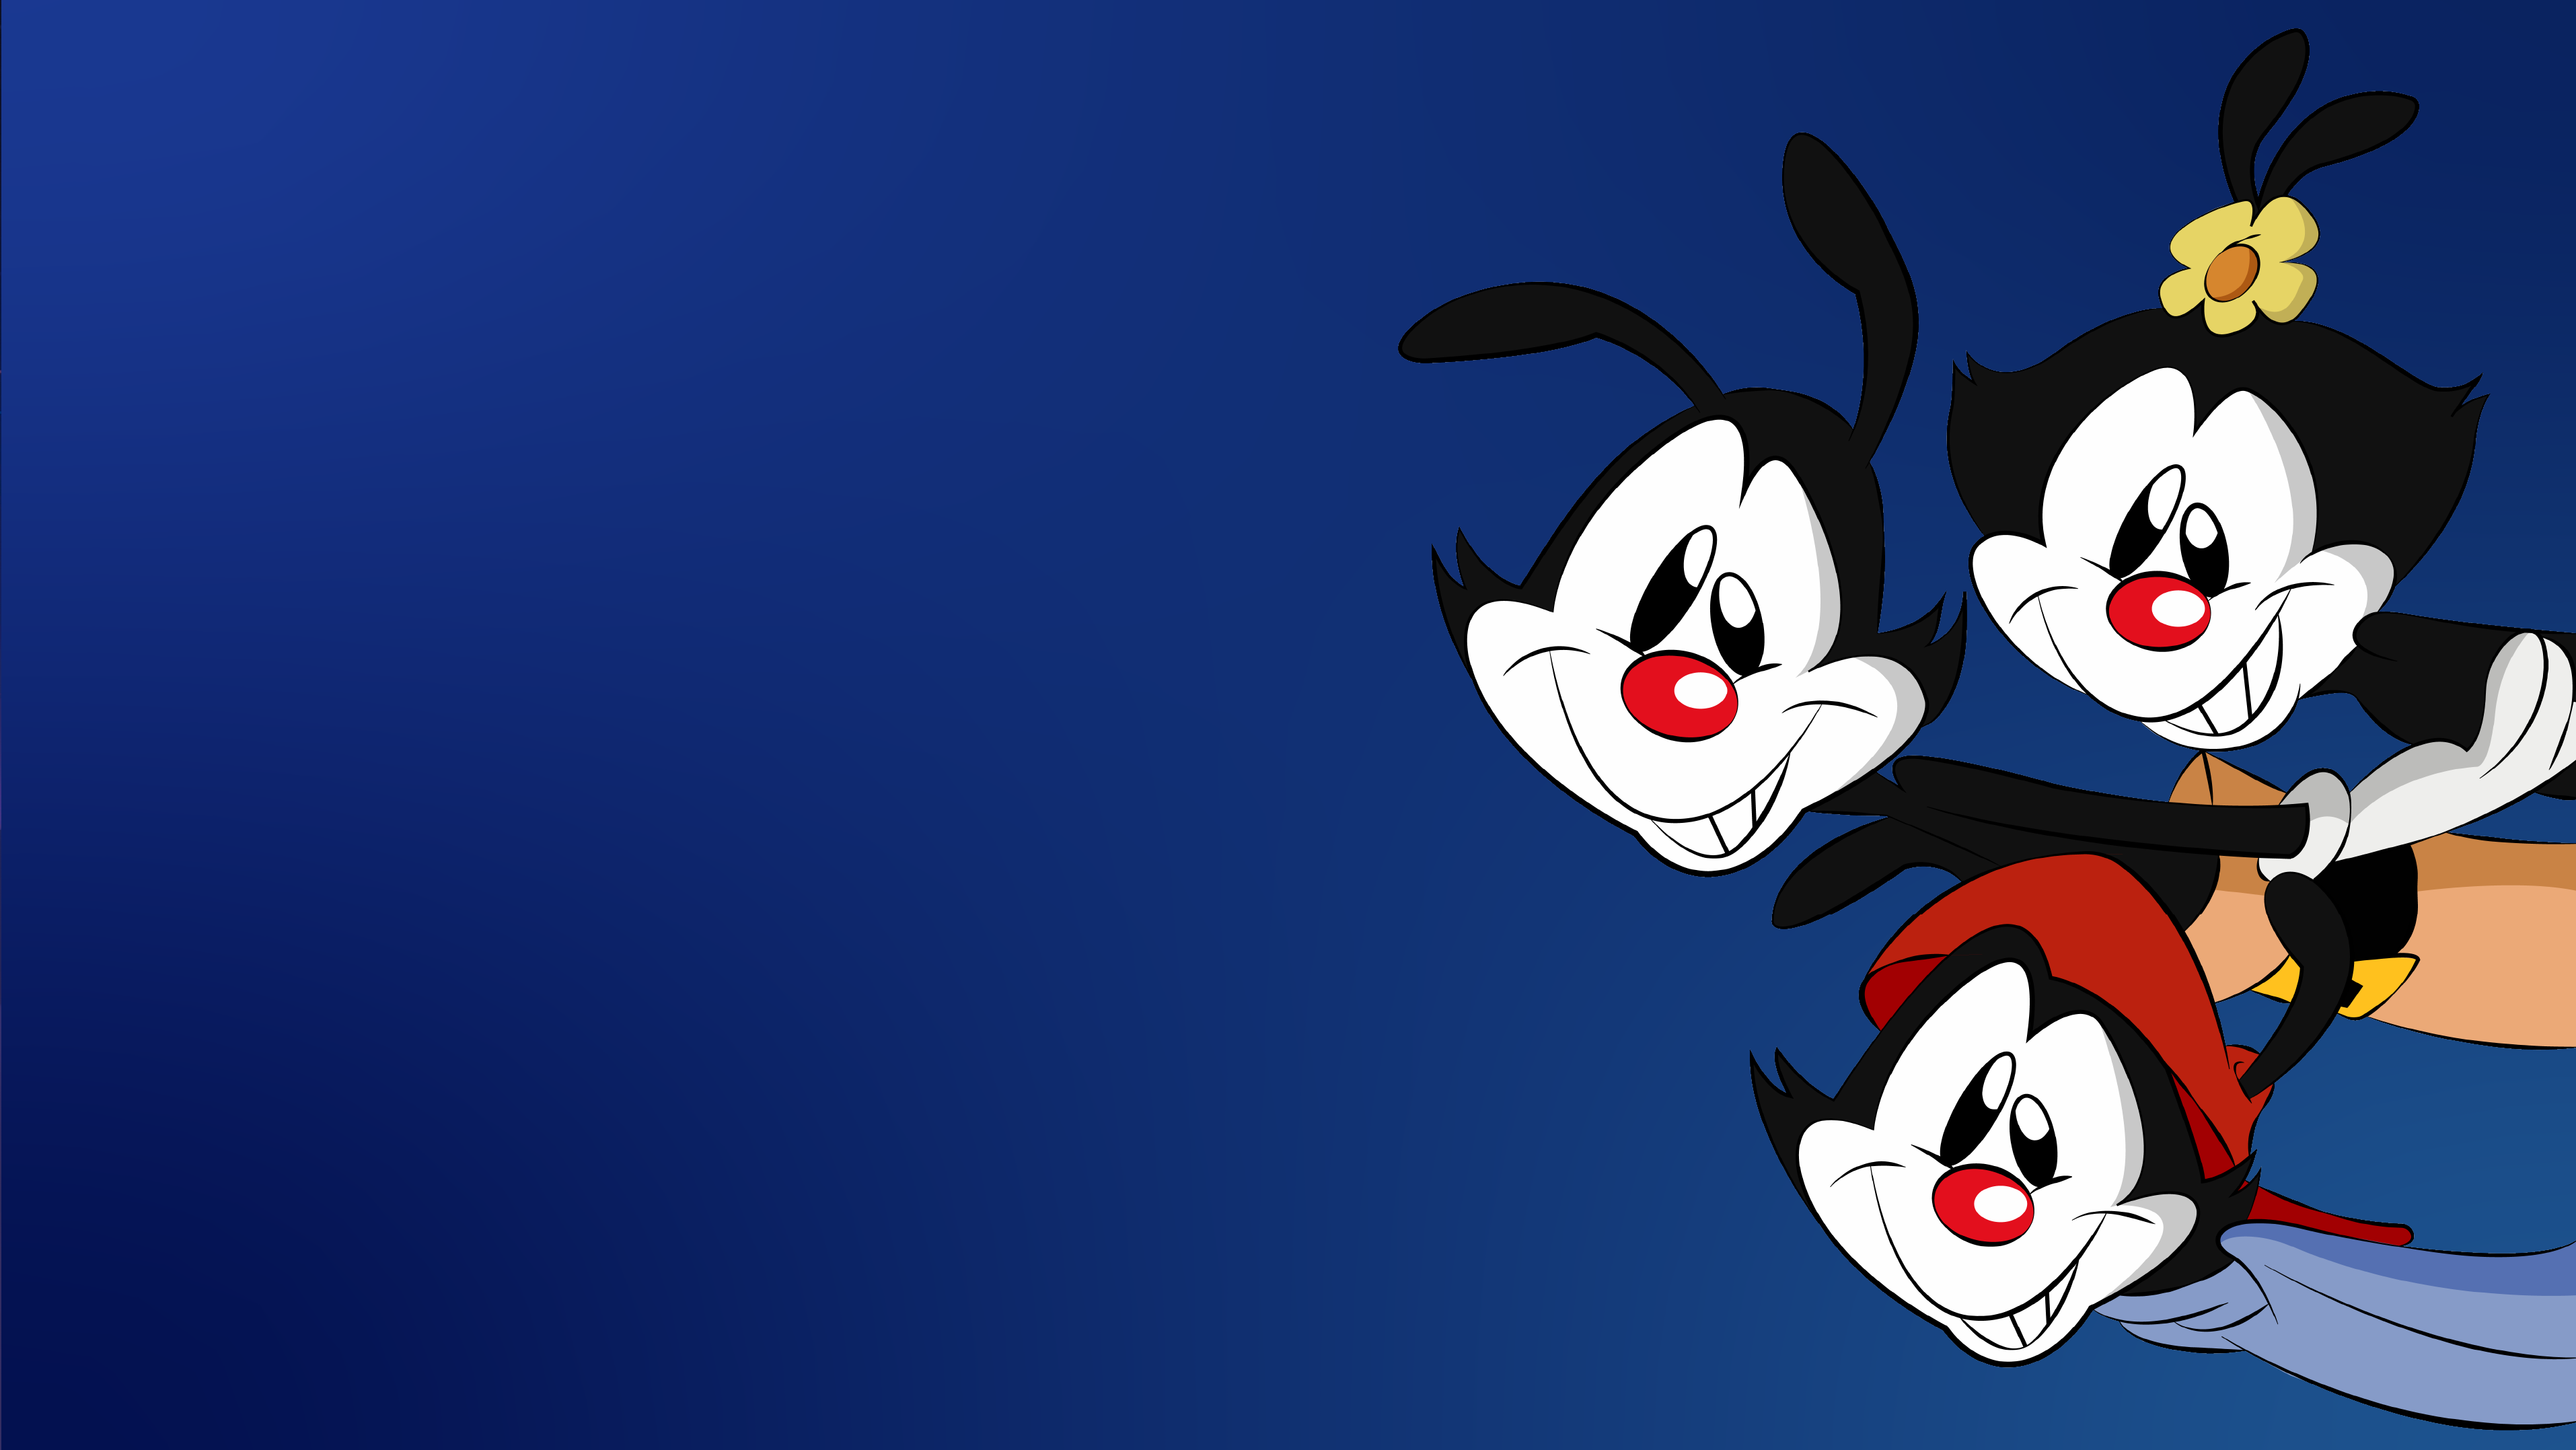 TV Show Animaniacs (1993) HD Wallpaper | Background Image